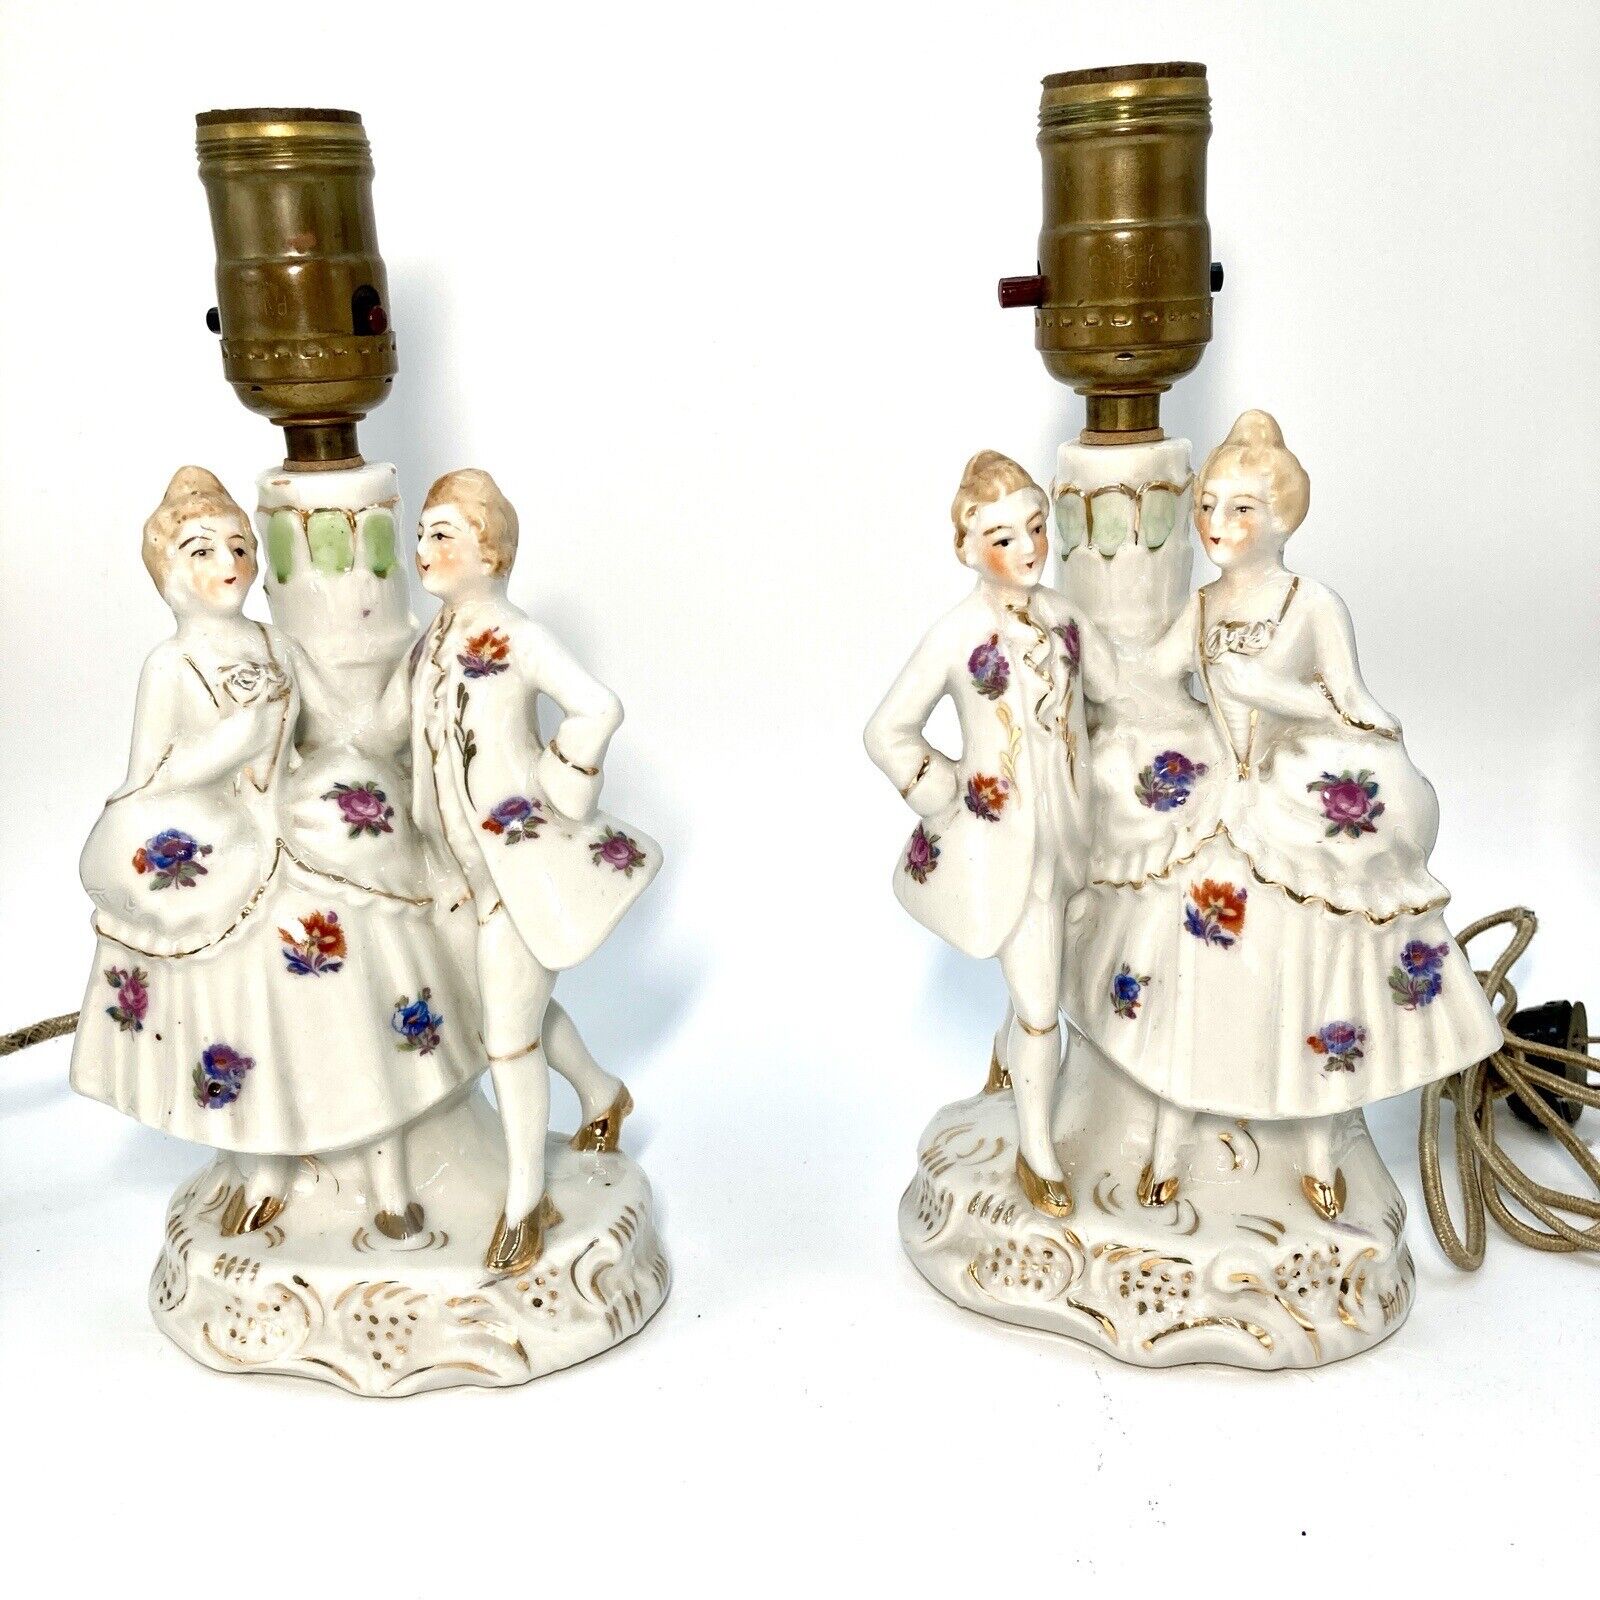 2 Lamp Bases - Colonial Man and Woman Courting / Marriage Ceramic Vintage